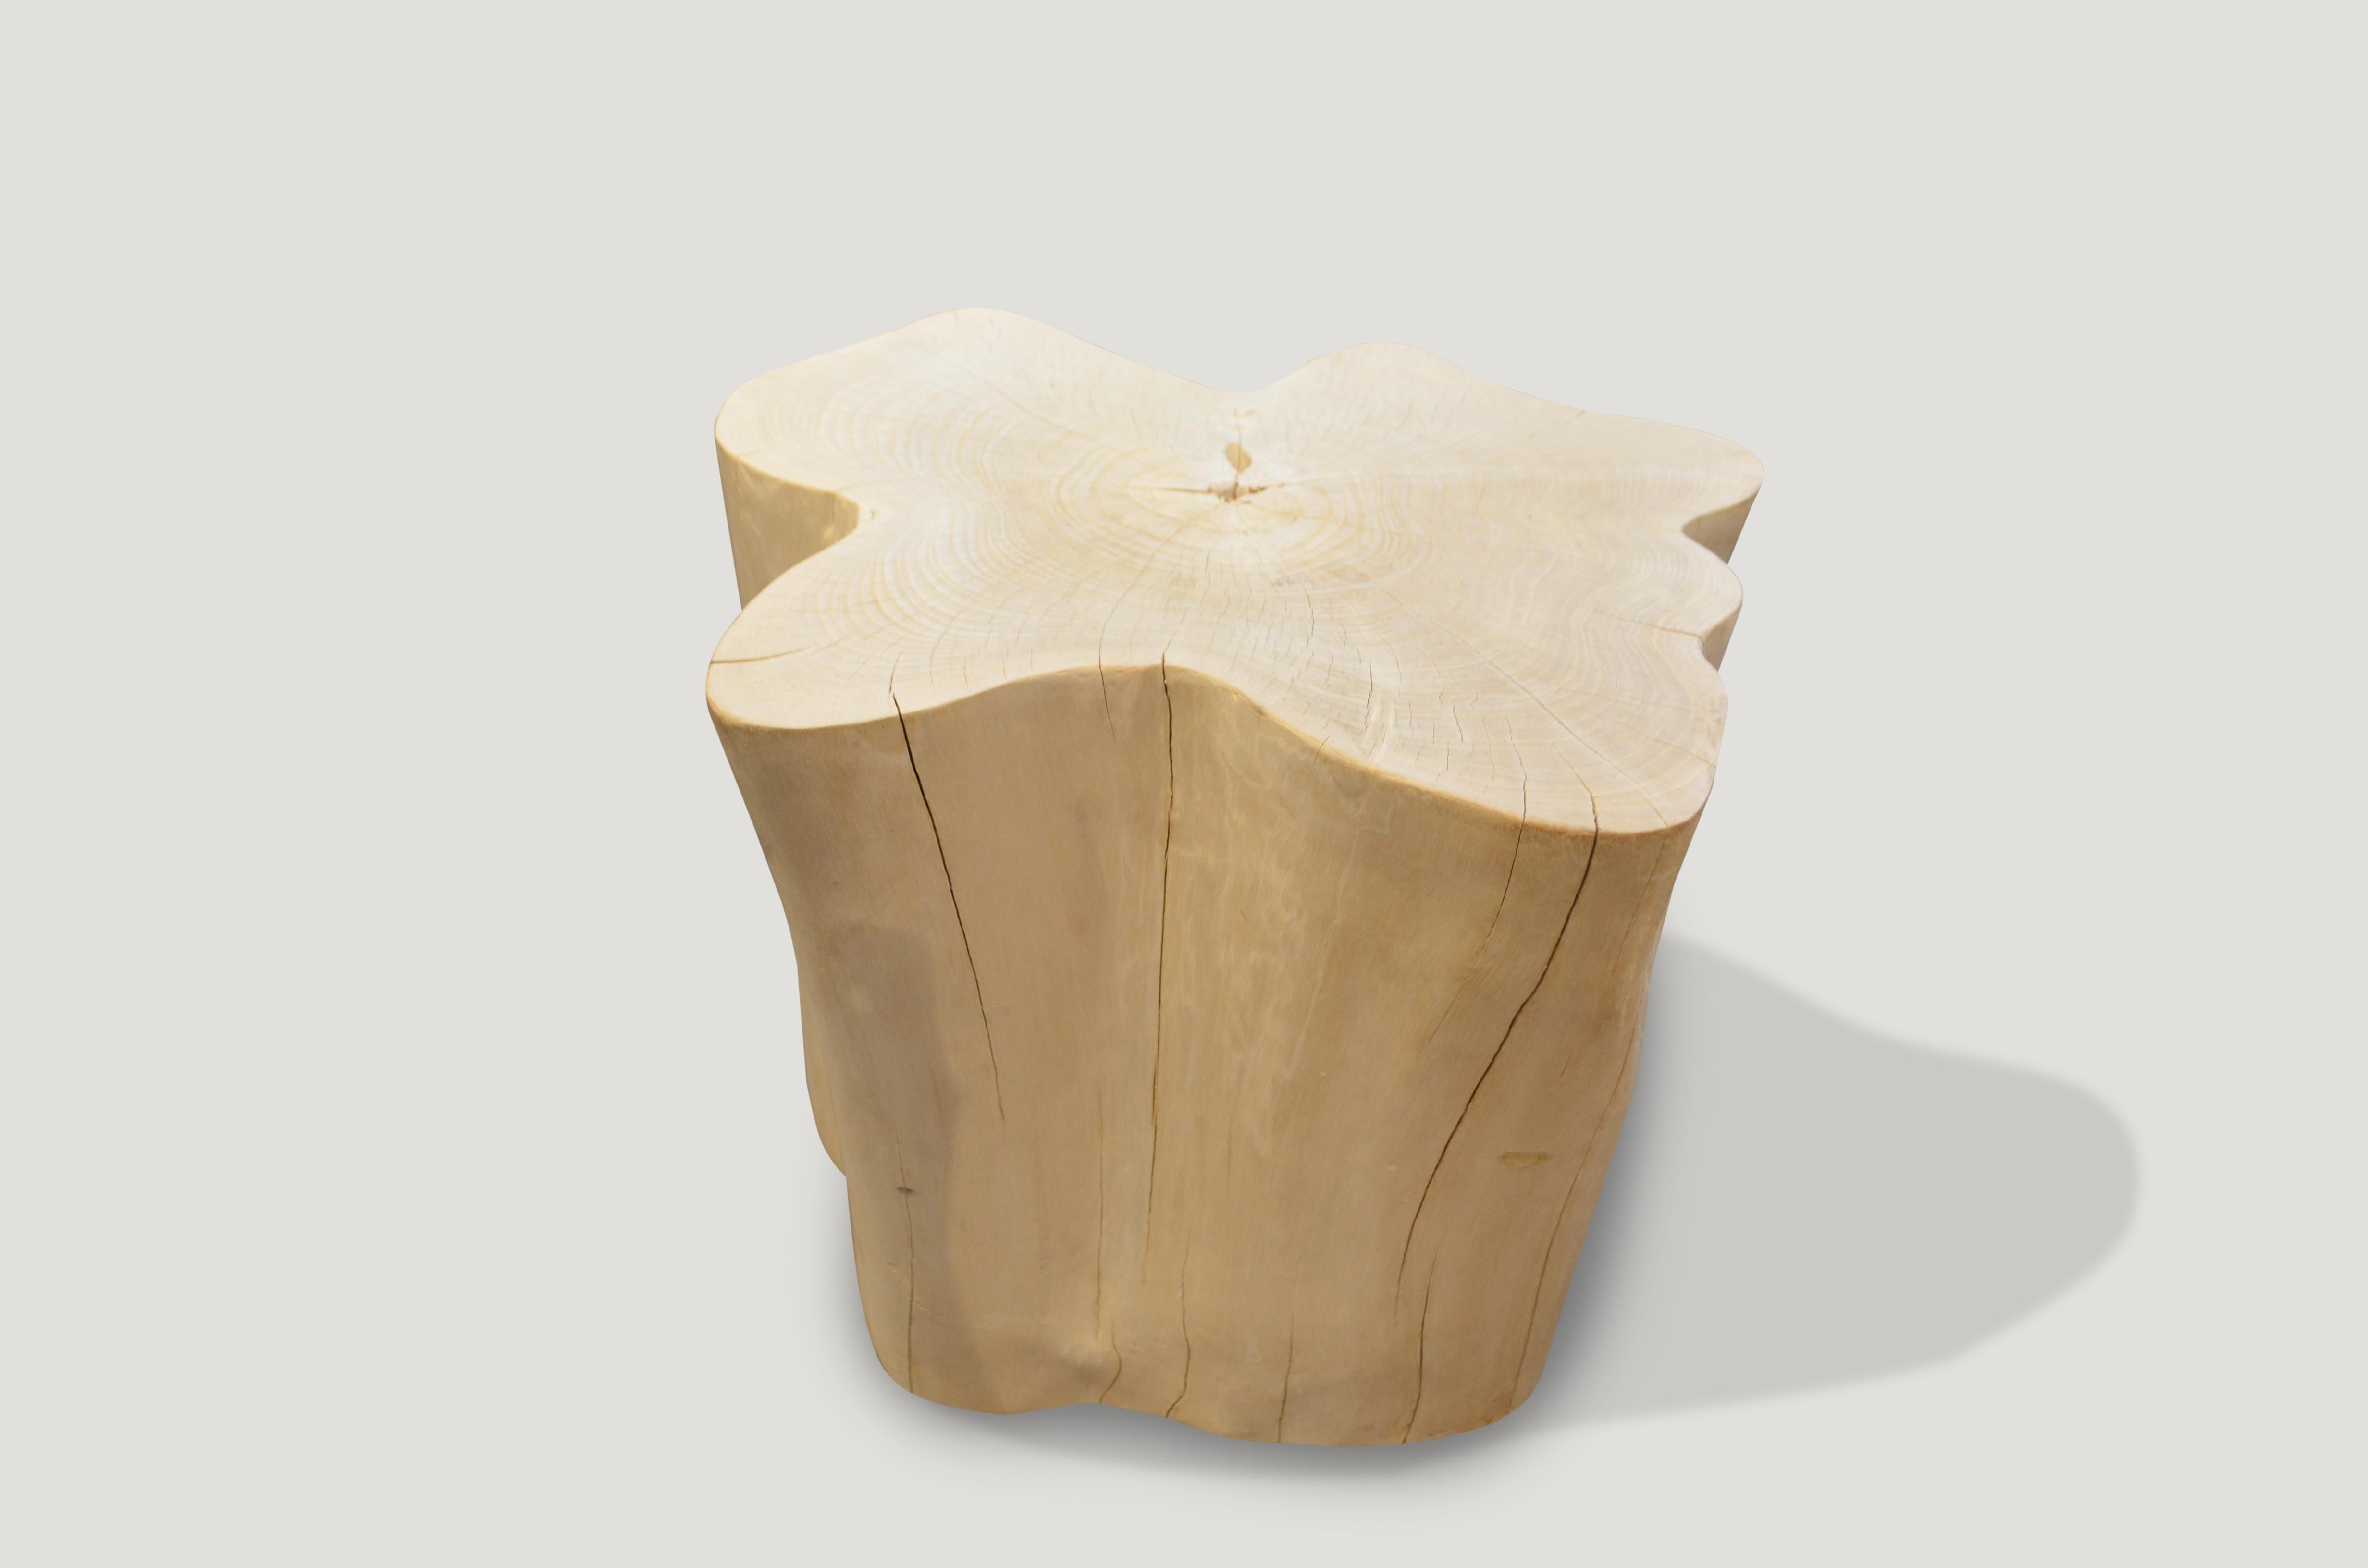 Reclaimed bleached teak wood amorphous side table. A slight graduation from the bottom to the top. 

The St. Barts collection features an exciting new line of organic white wash and natural weathered teak furniture. The reclaimed teak is left to